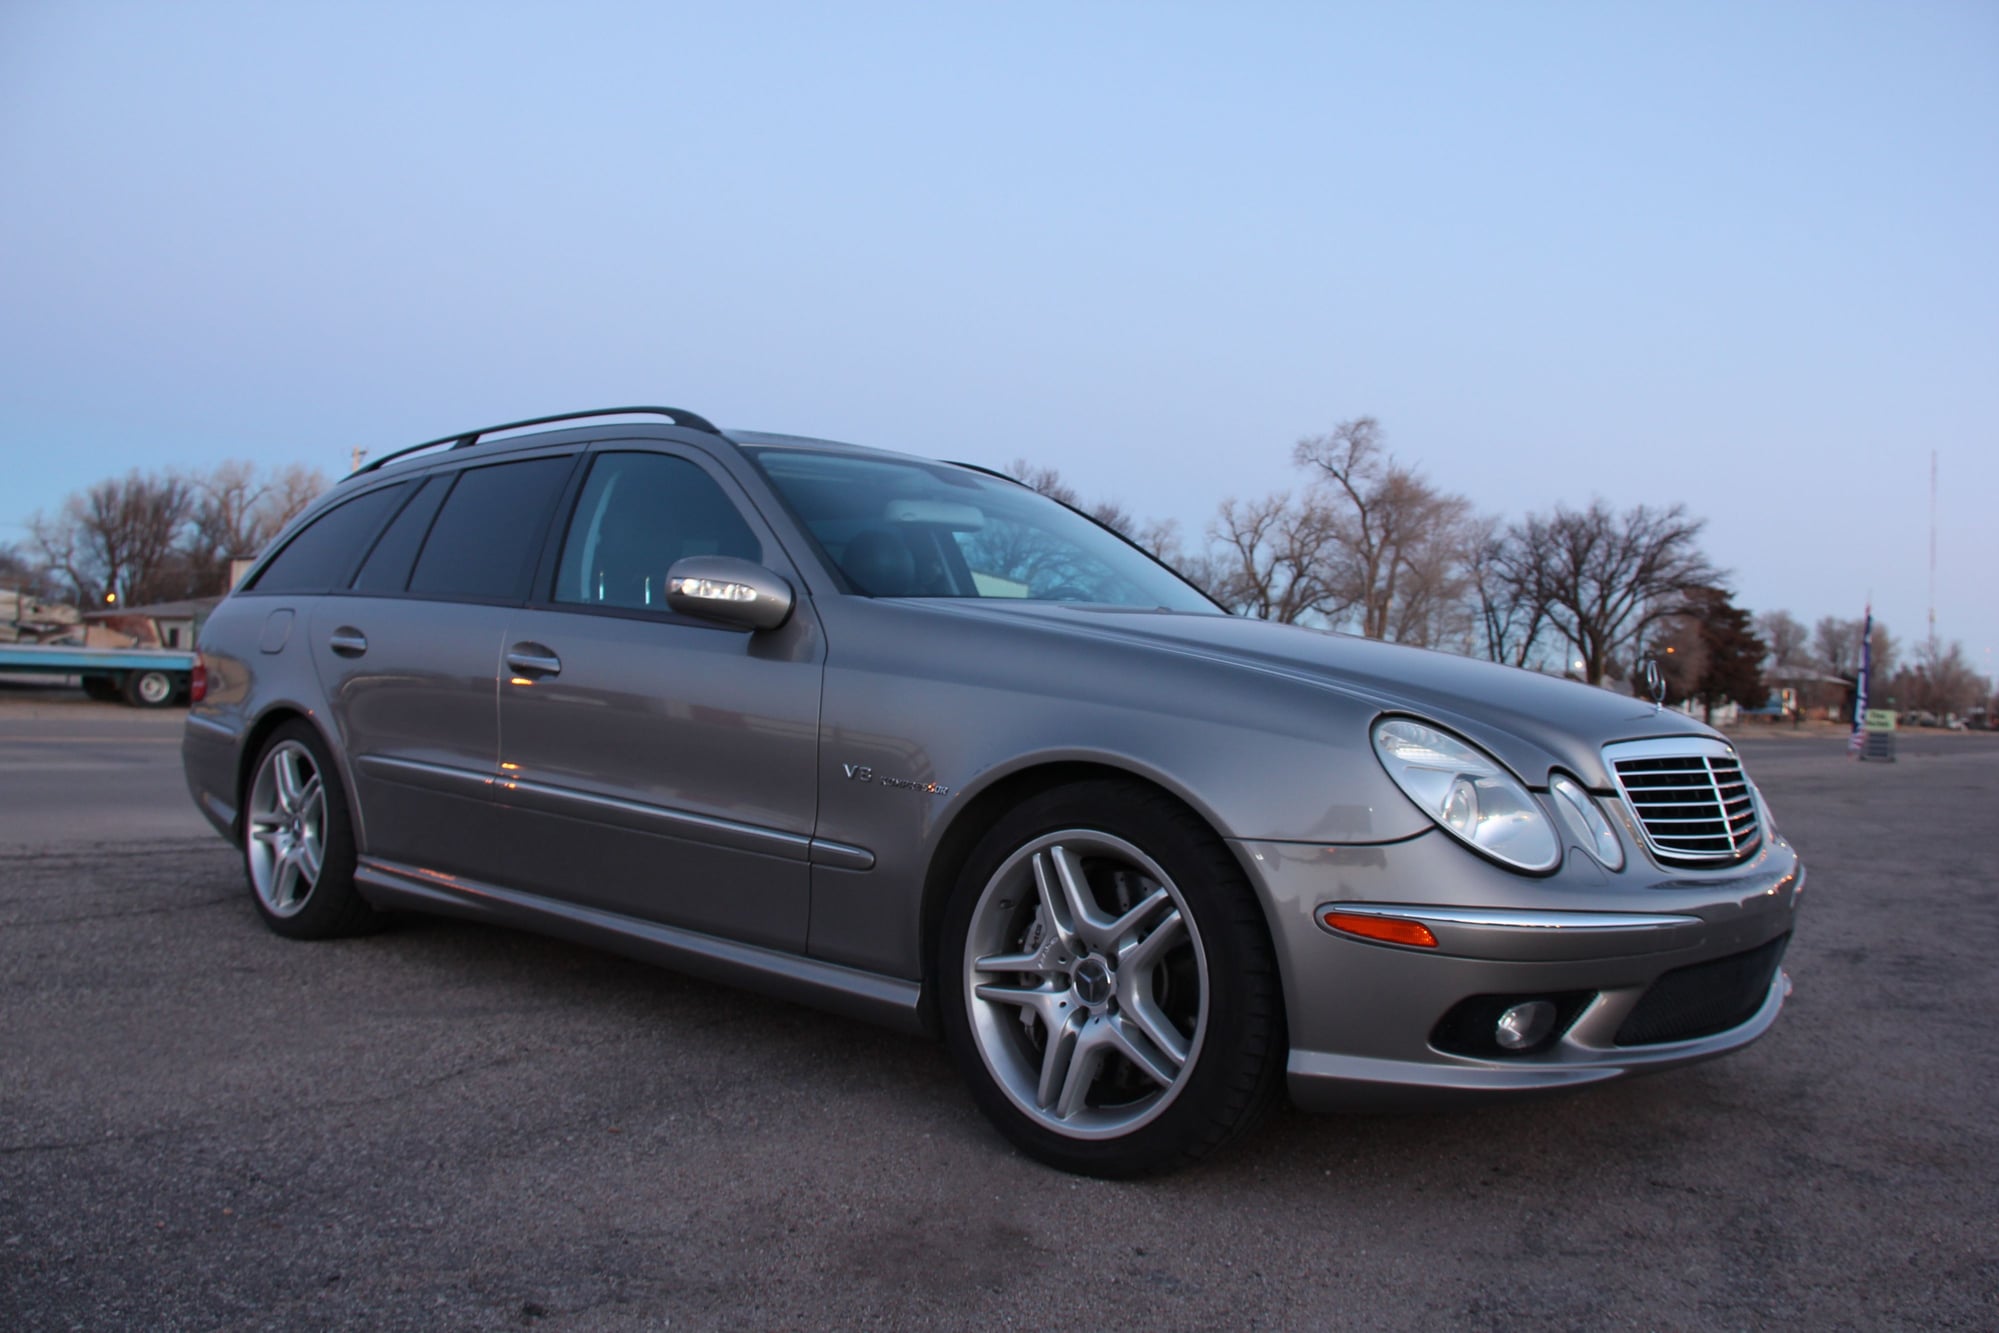 2005 Mercedes-Benz E55 AMG - 2005 E55 Wagon 90k Miles - Used - VIN WDBUH76J95A793768 - 90,500 Miles - 8 cyl - 2WD - Automatic - Wagon - Silver - Great Bend, KS 67530, United States